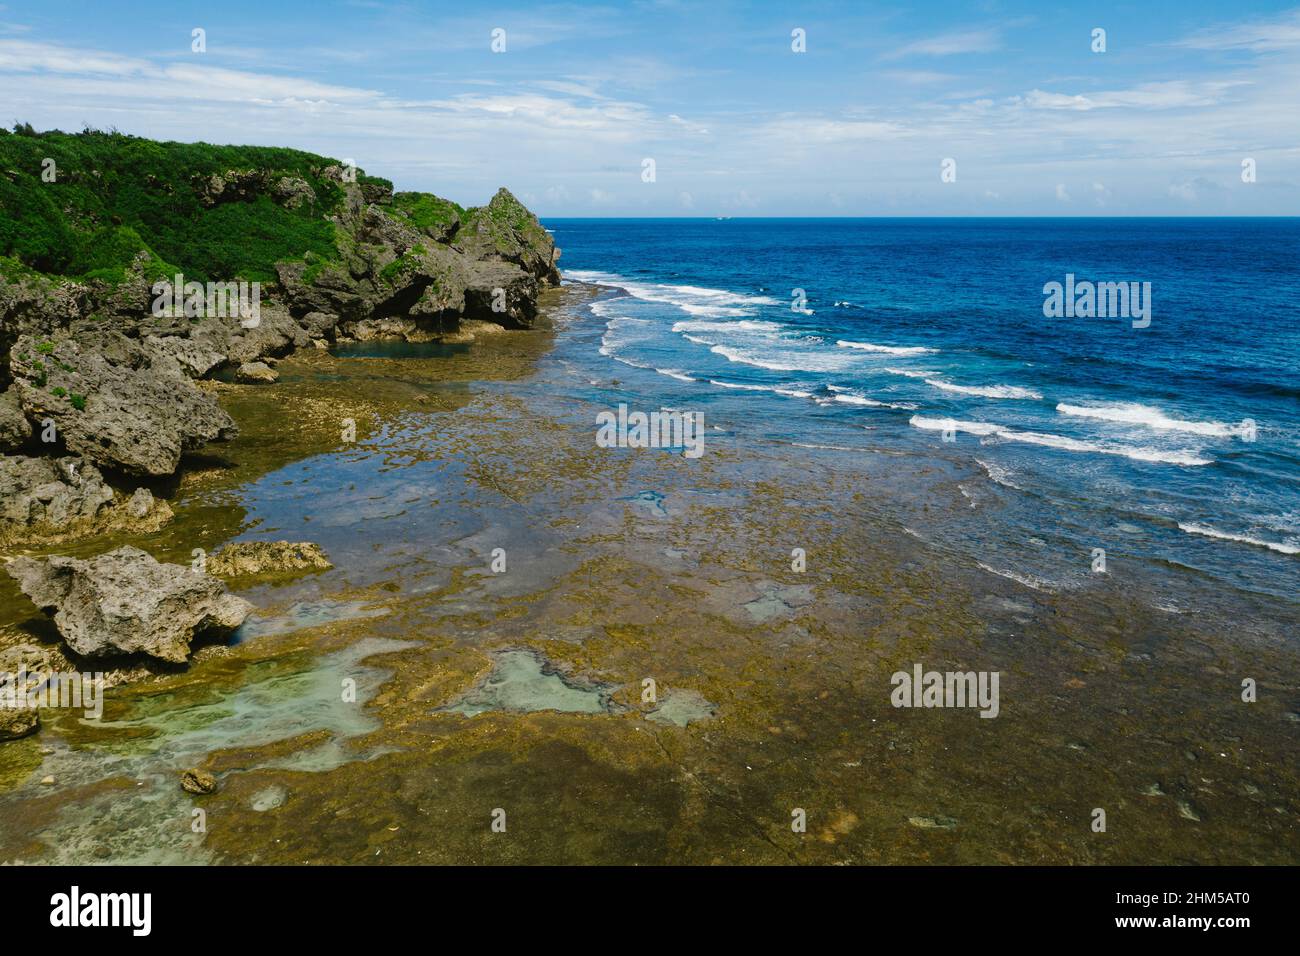 Tide pools, waves and blue ocean cliffs on coastline of island Stock Photo